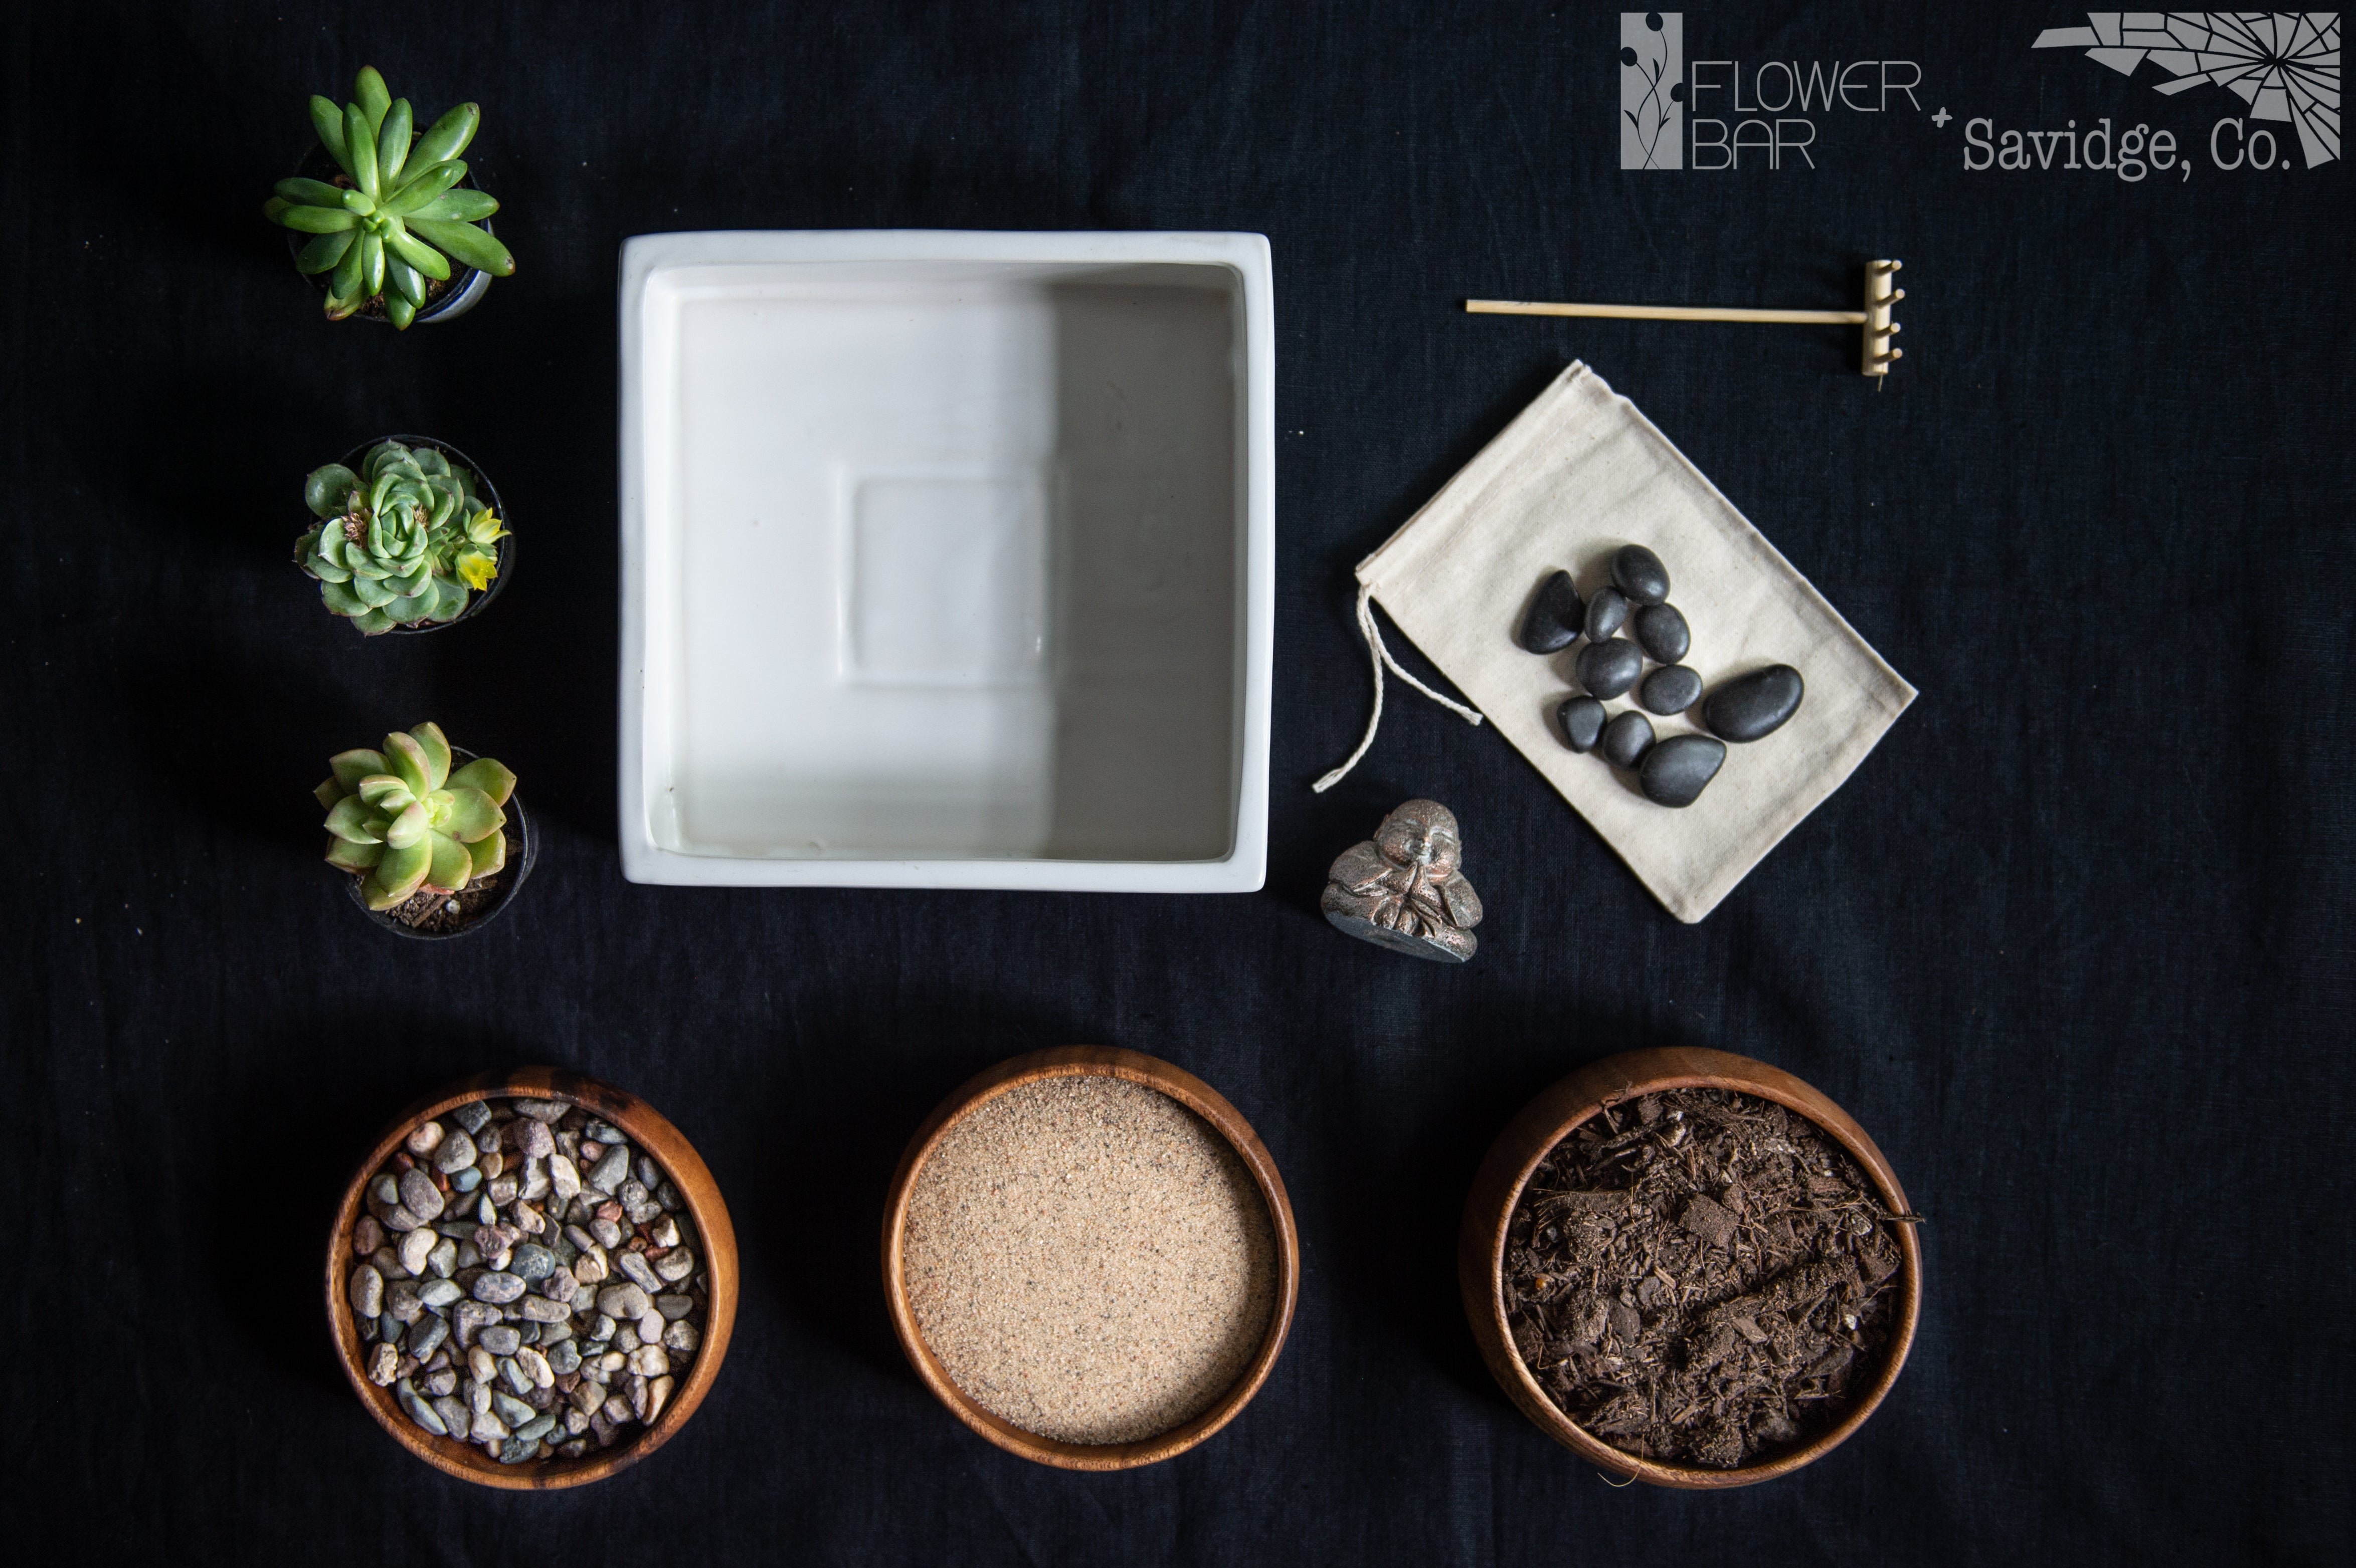 The Teahouse Plant Project Ingredients. (1) Pair of gardening gloves (1) square container (1) Miniature buddha statue (3) Succulents Bag of cactus soil Bag of small pebbles  Bag of decorative sand Flat stones & Wooden rake